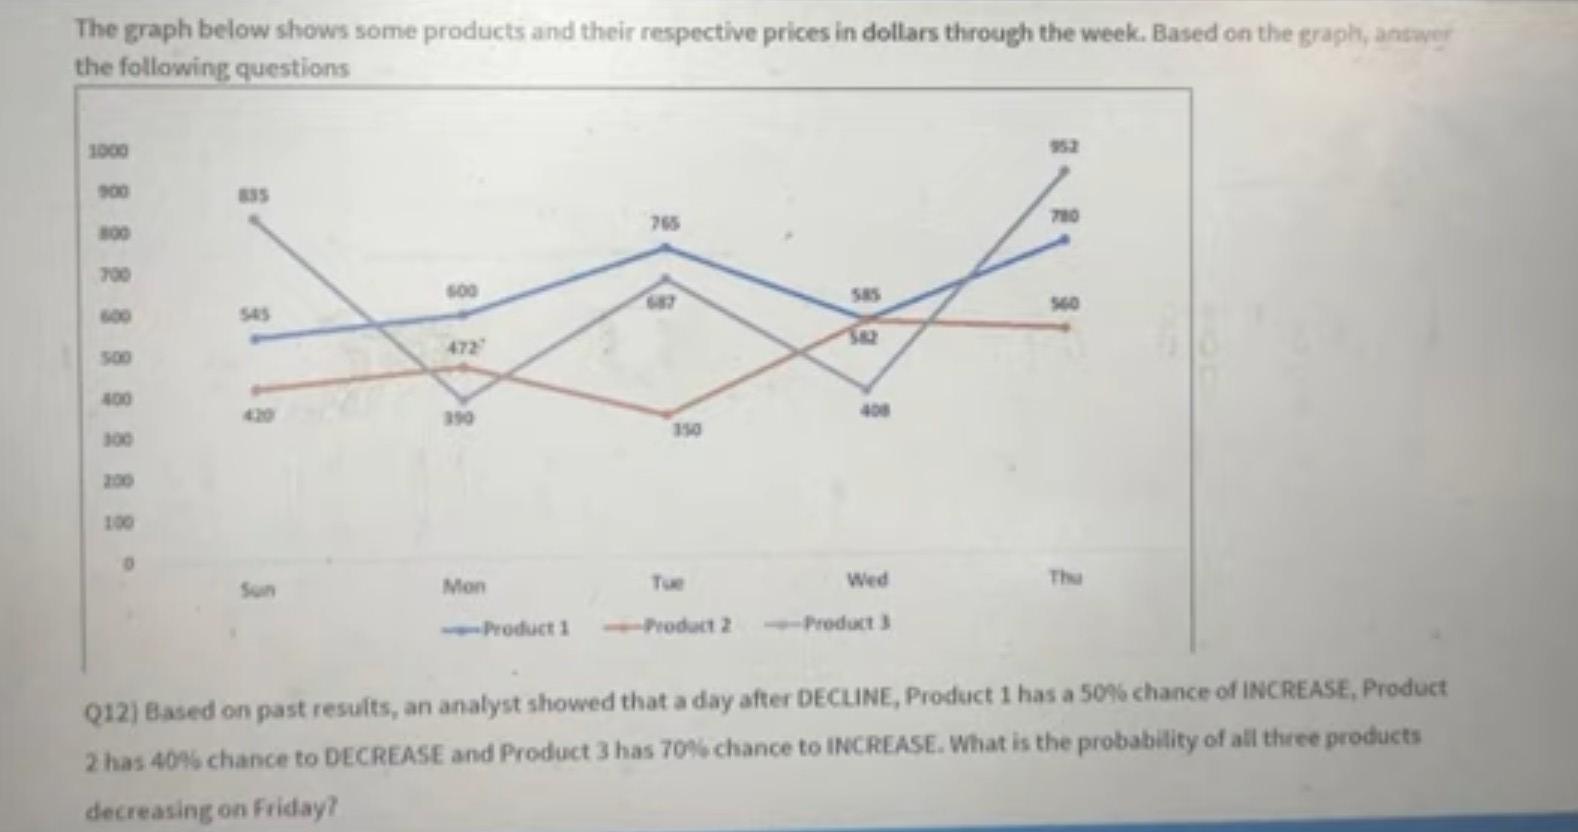 The graph below shows some products and their respective prices in dollars through the week. Based on the